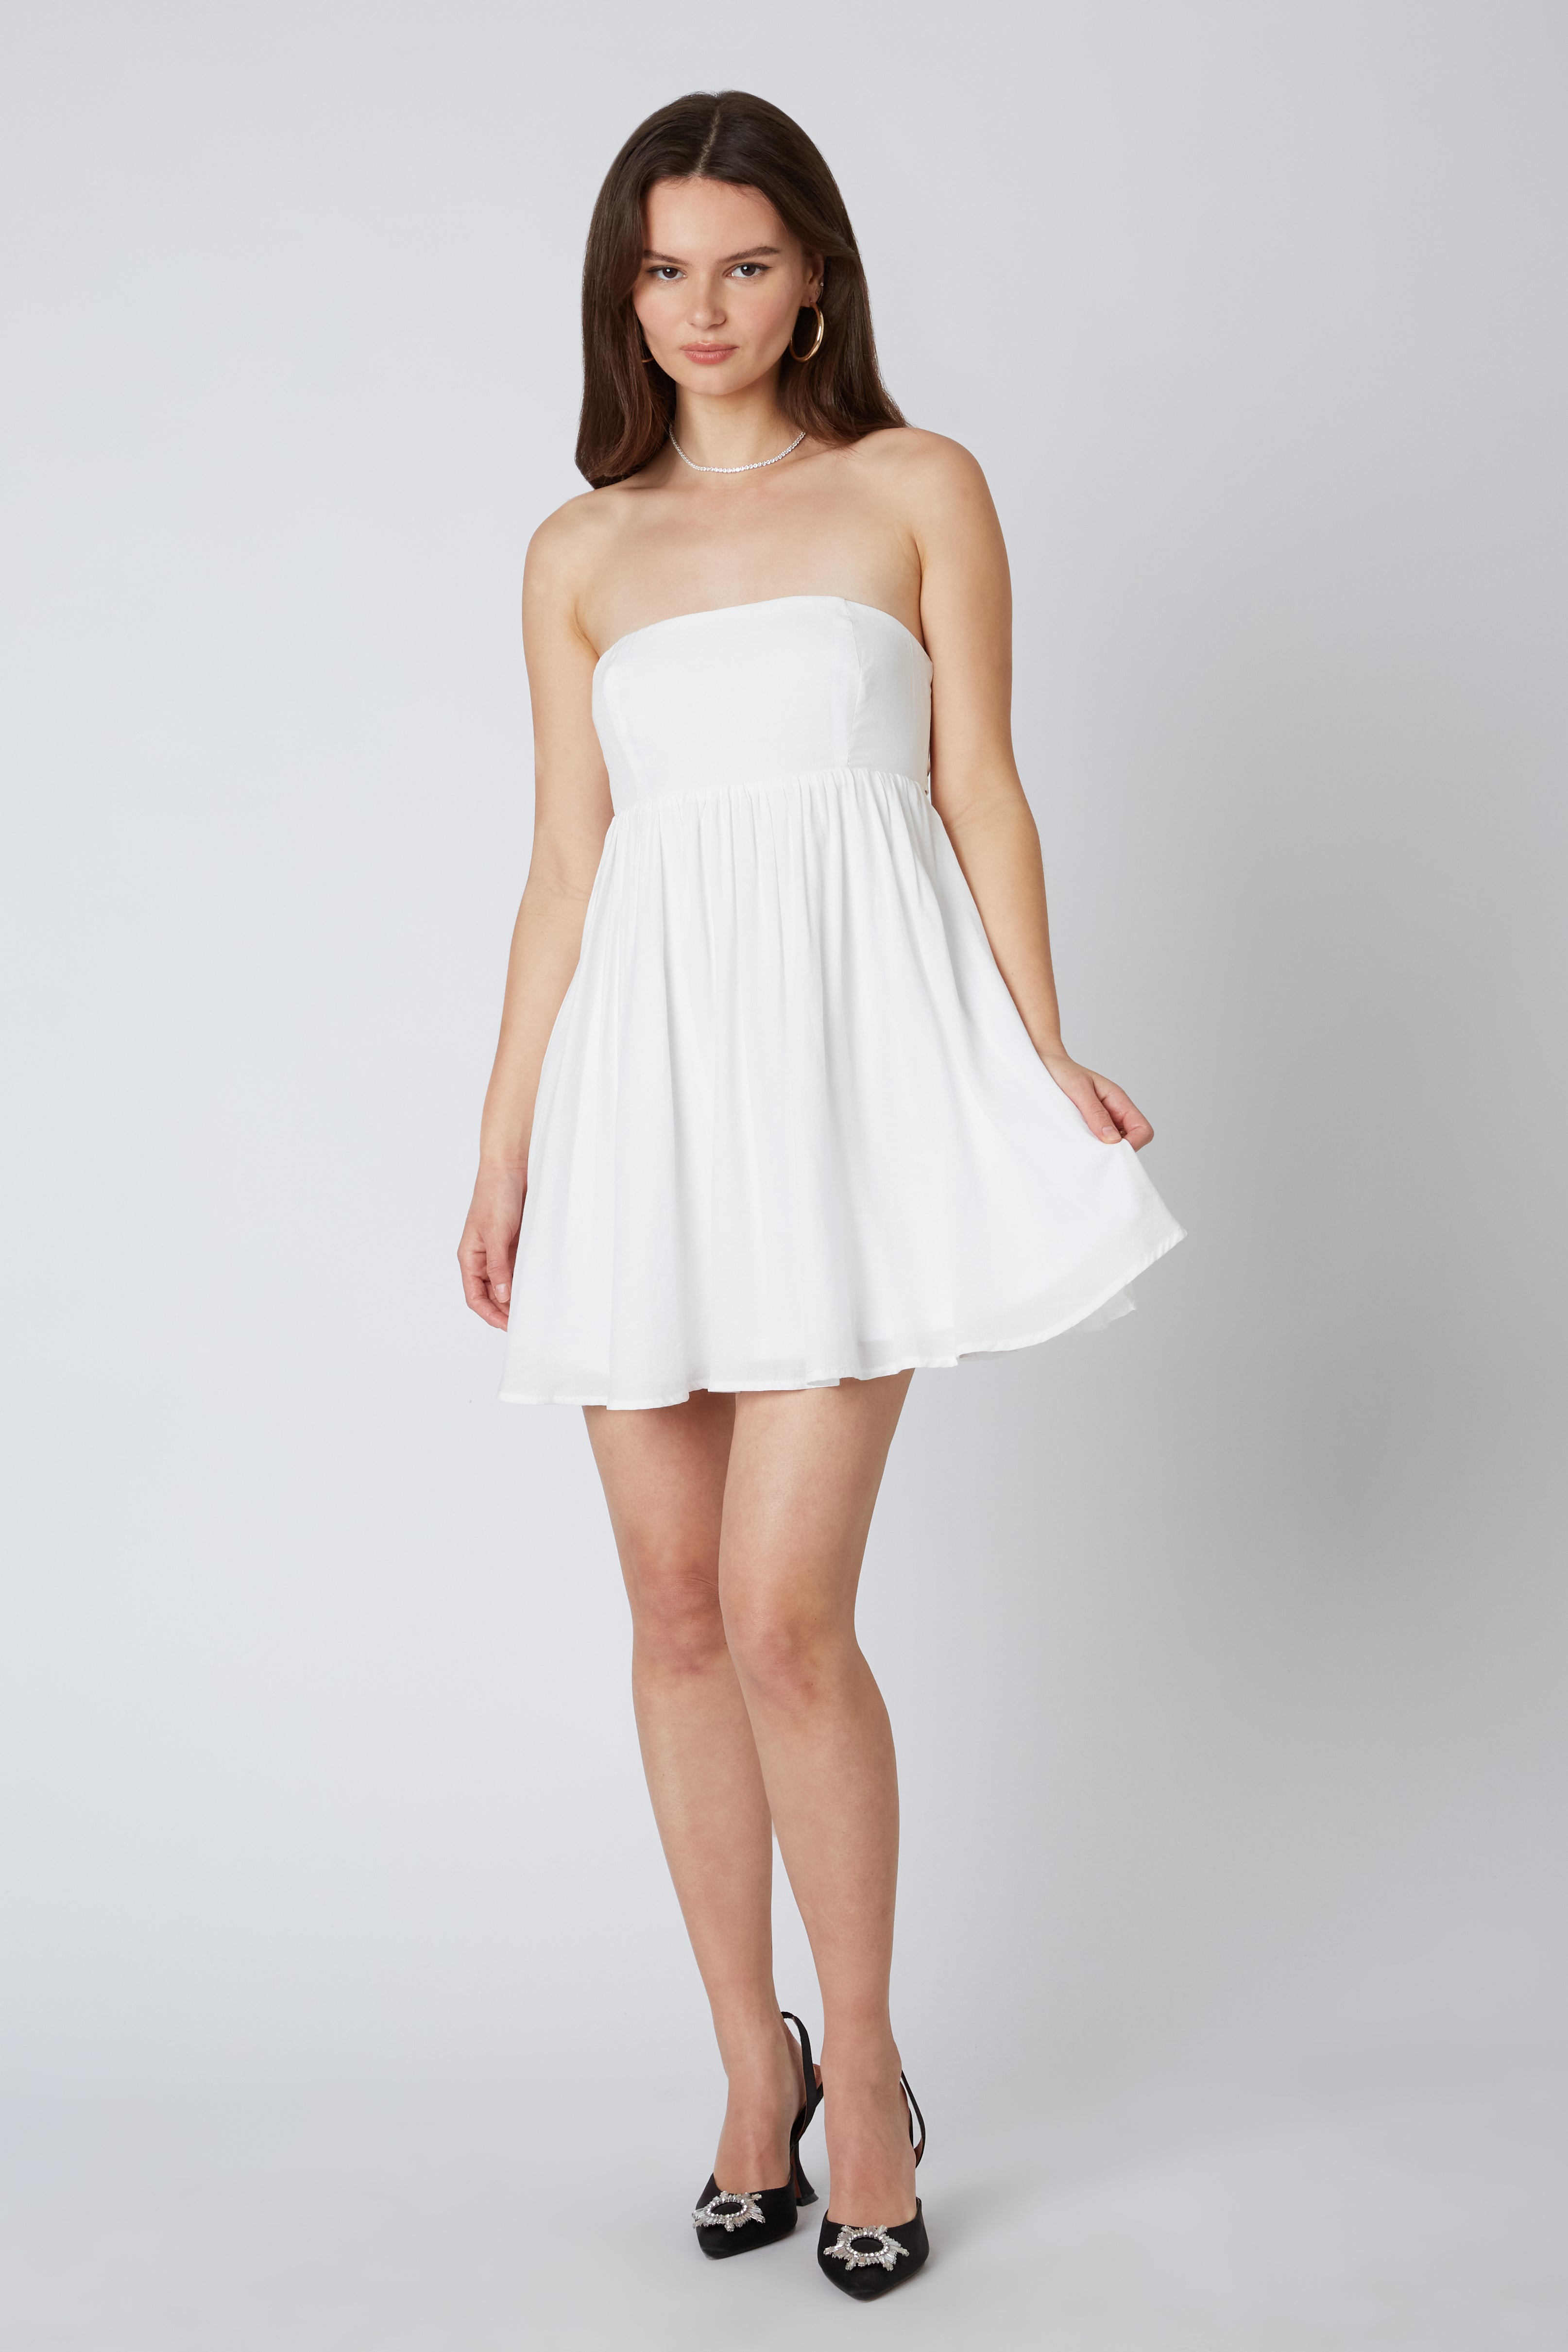 Babydoll Strapless Dress in White Front